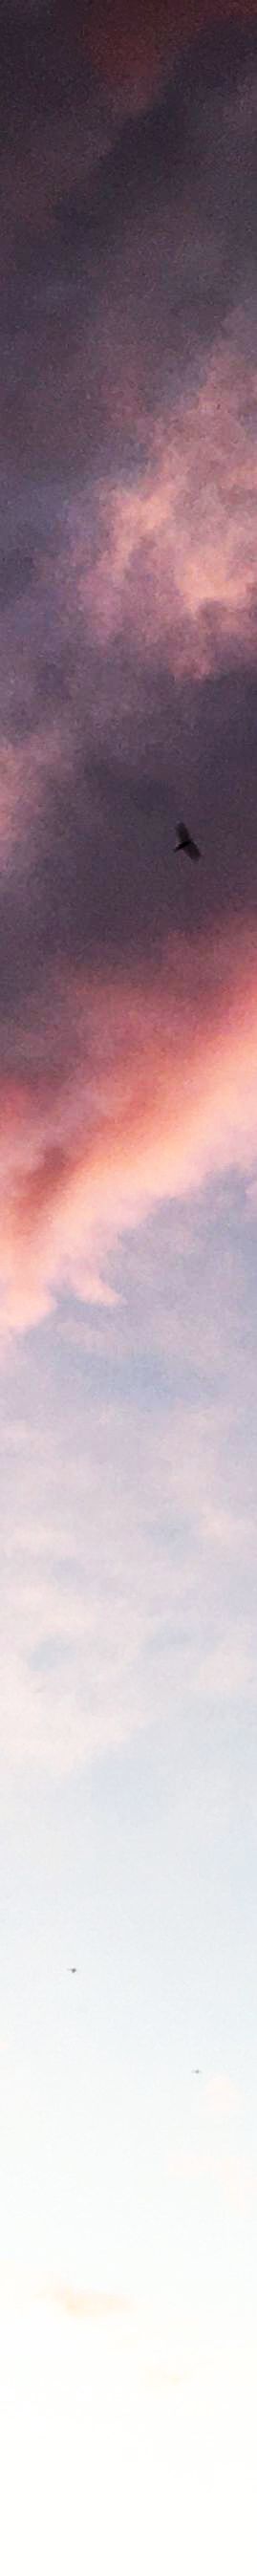 Background image of a very pixelated sky